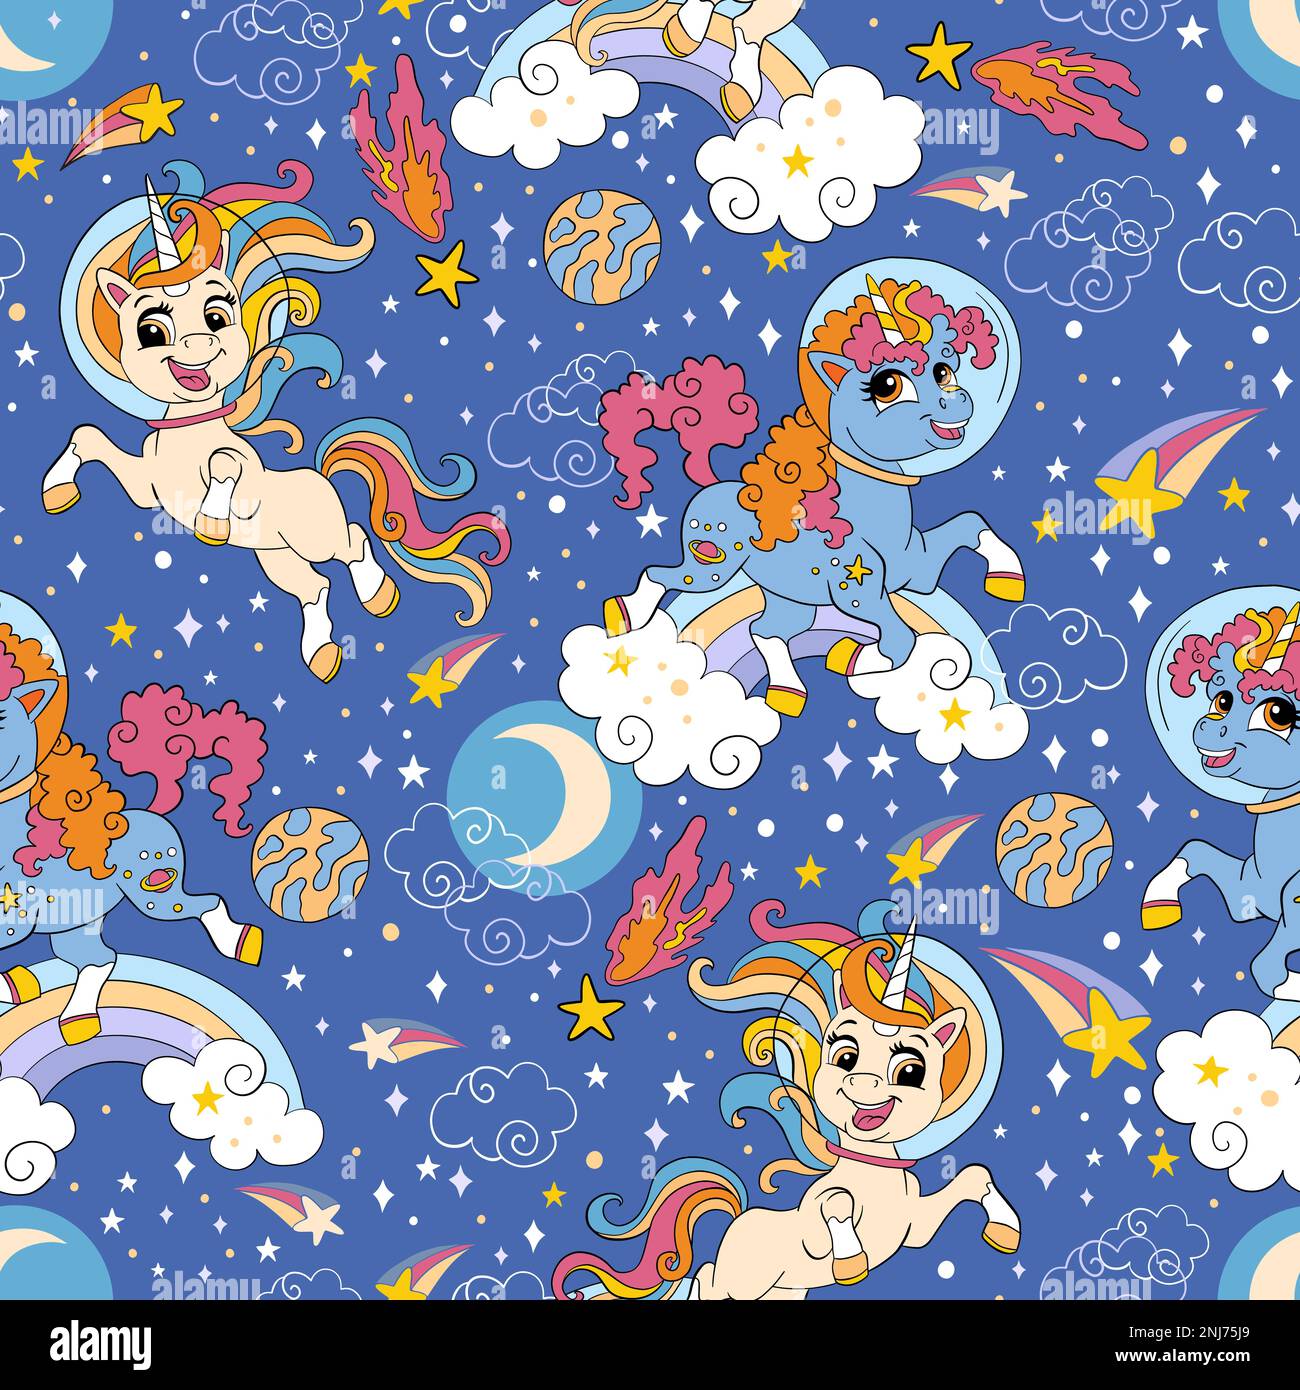 Seamless pattern with cute space unicorns, stars, planets and comets. Unicorn background. Vector illustration for party, print, baby shower, wallpaper Stock Vector